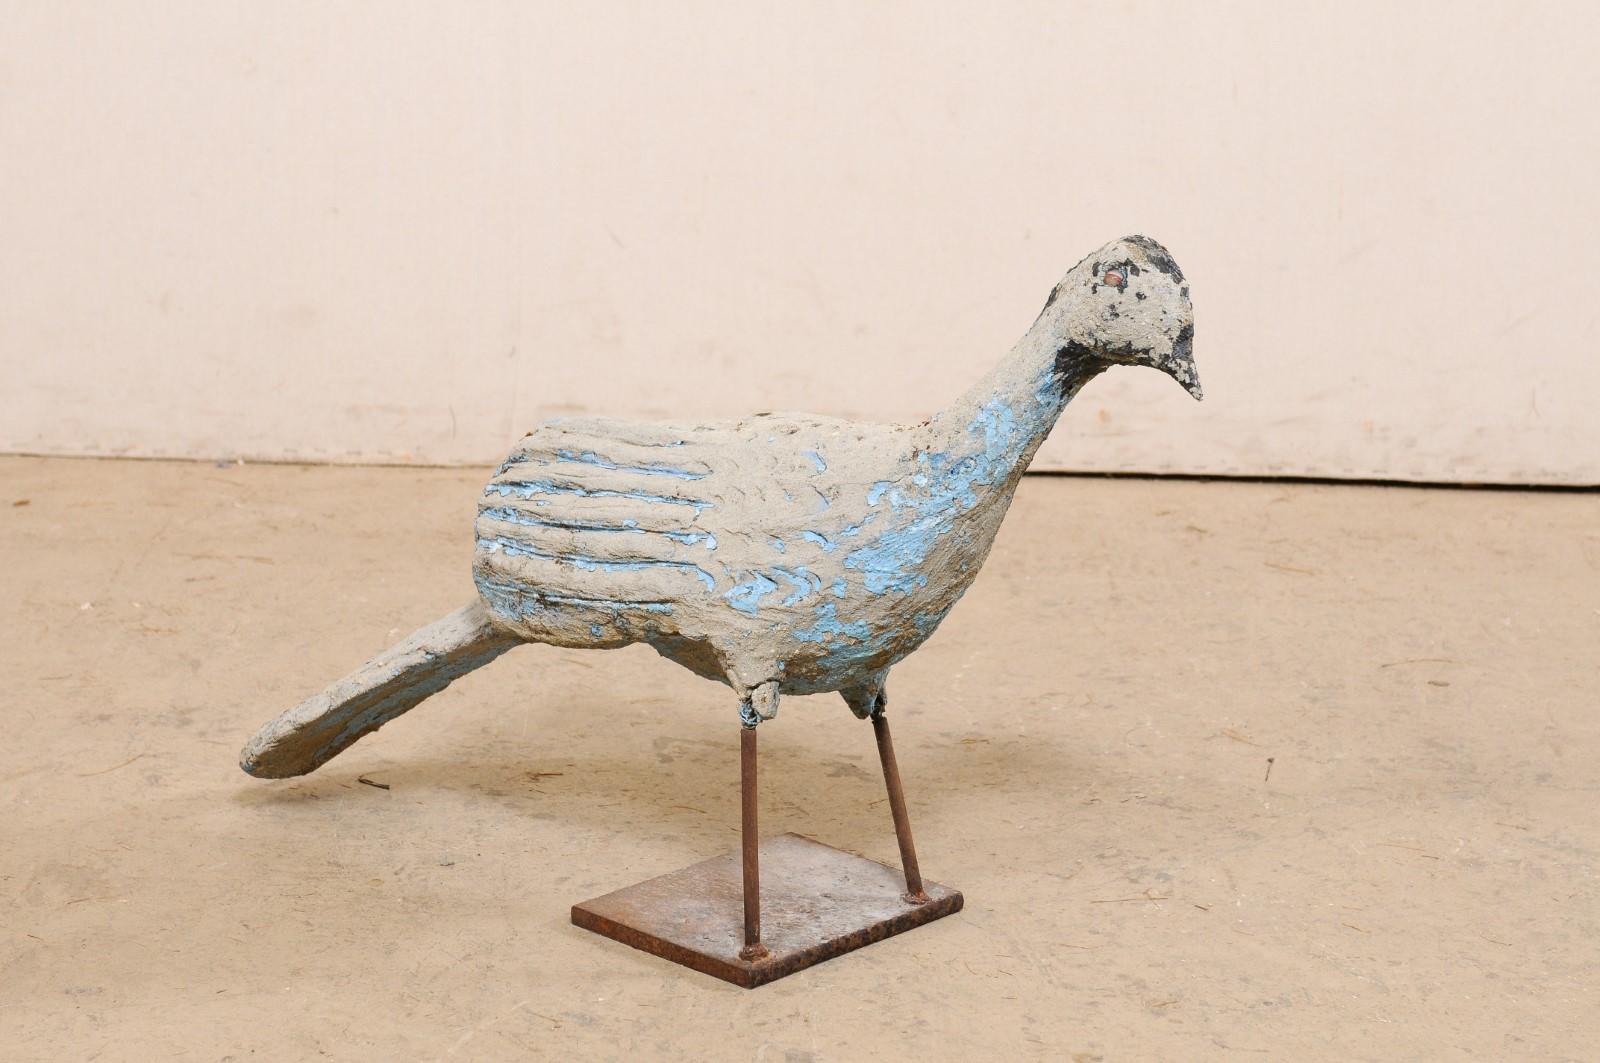 A Spanish painted peacock garden statue from the mid 20th century. This vintage statue from Spain, created of cast stone with iron legs, features a lovely little peafowl bird -standing upright with head slightly tilted in an inquisitive nature, and